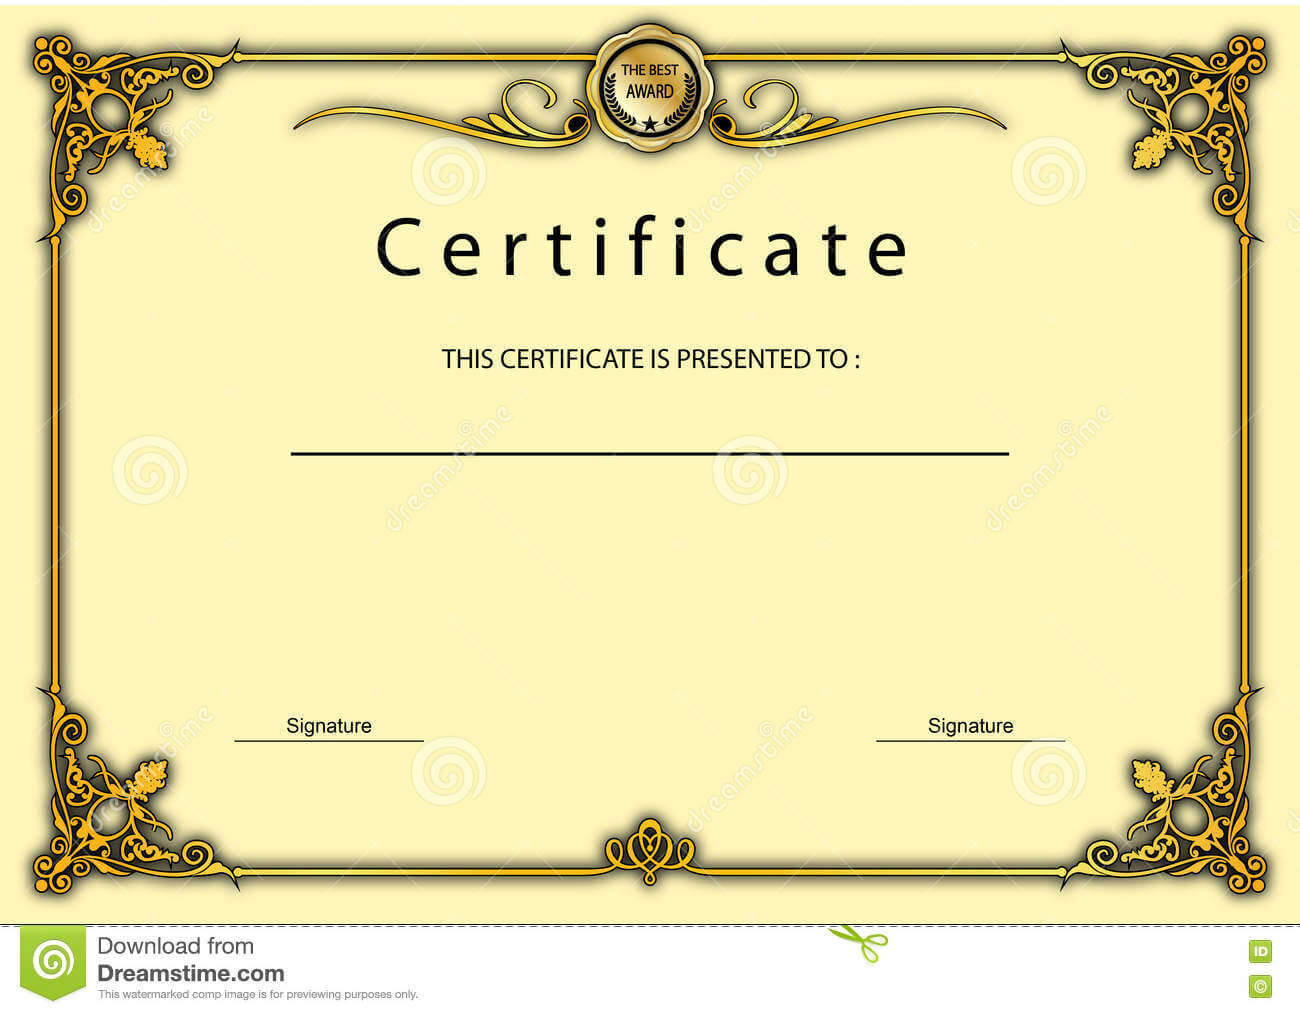 Vintage Certificate Award / Diploma Template Stock With Beautiful Certificate Templates